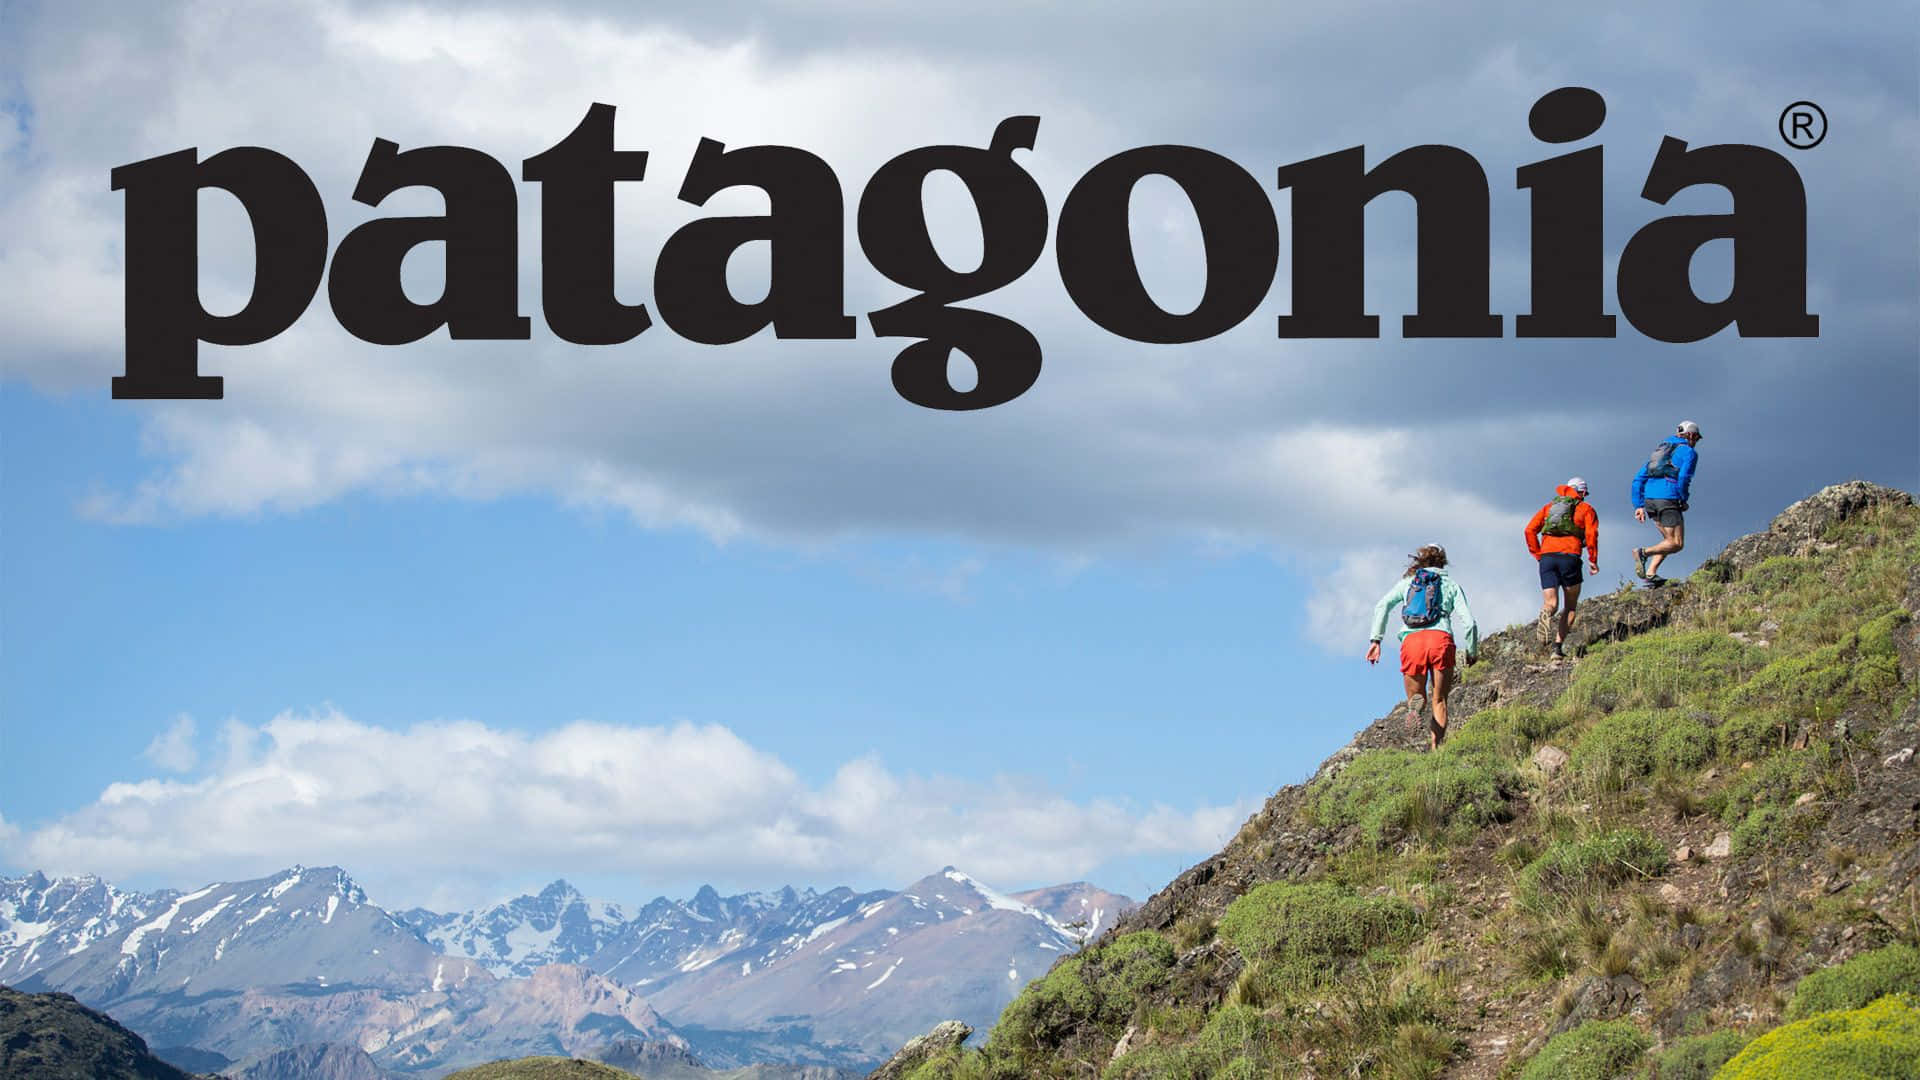 Experience Patagonia's rustic beauty